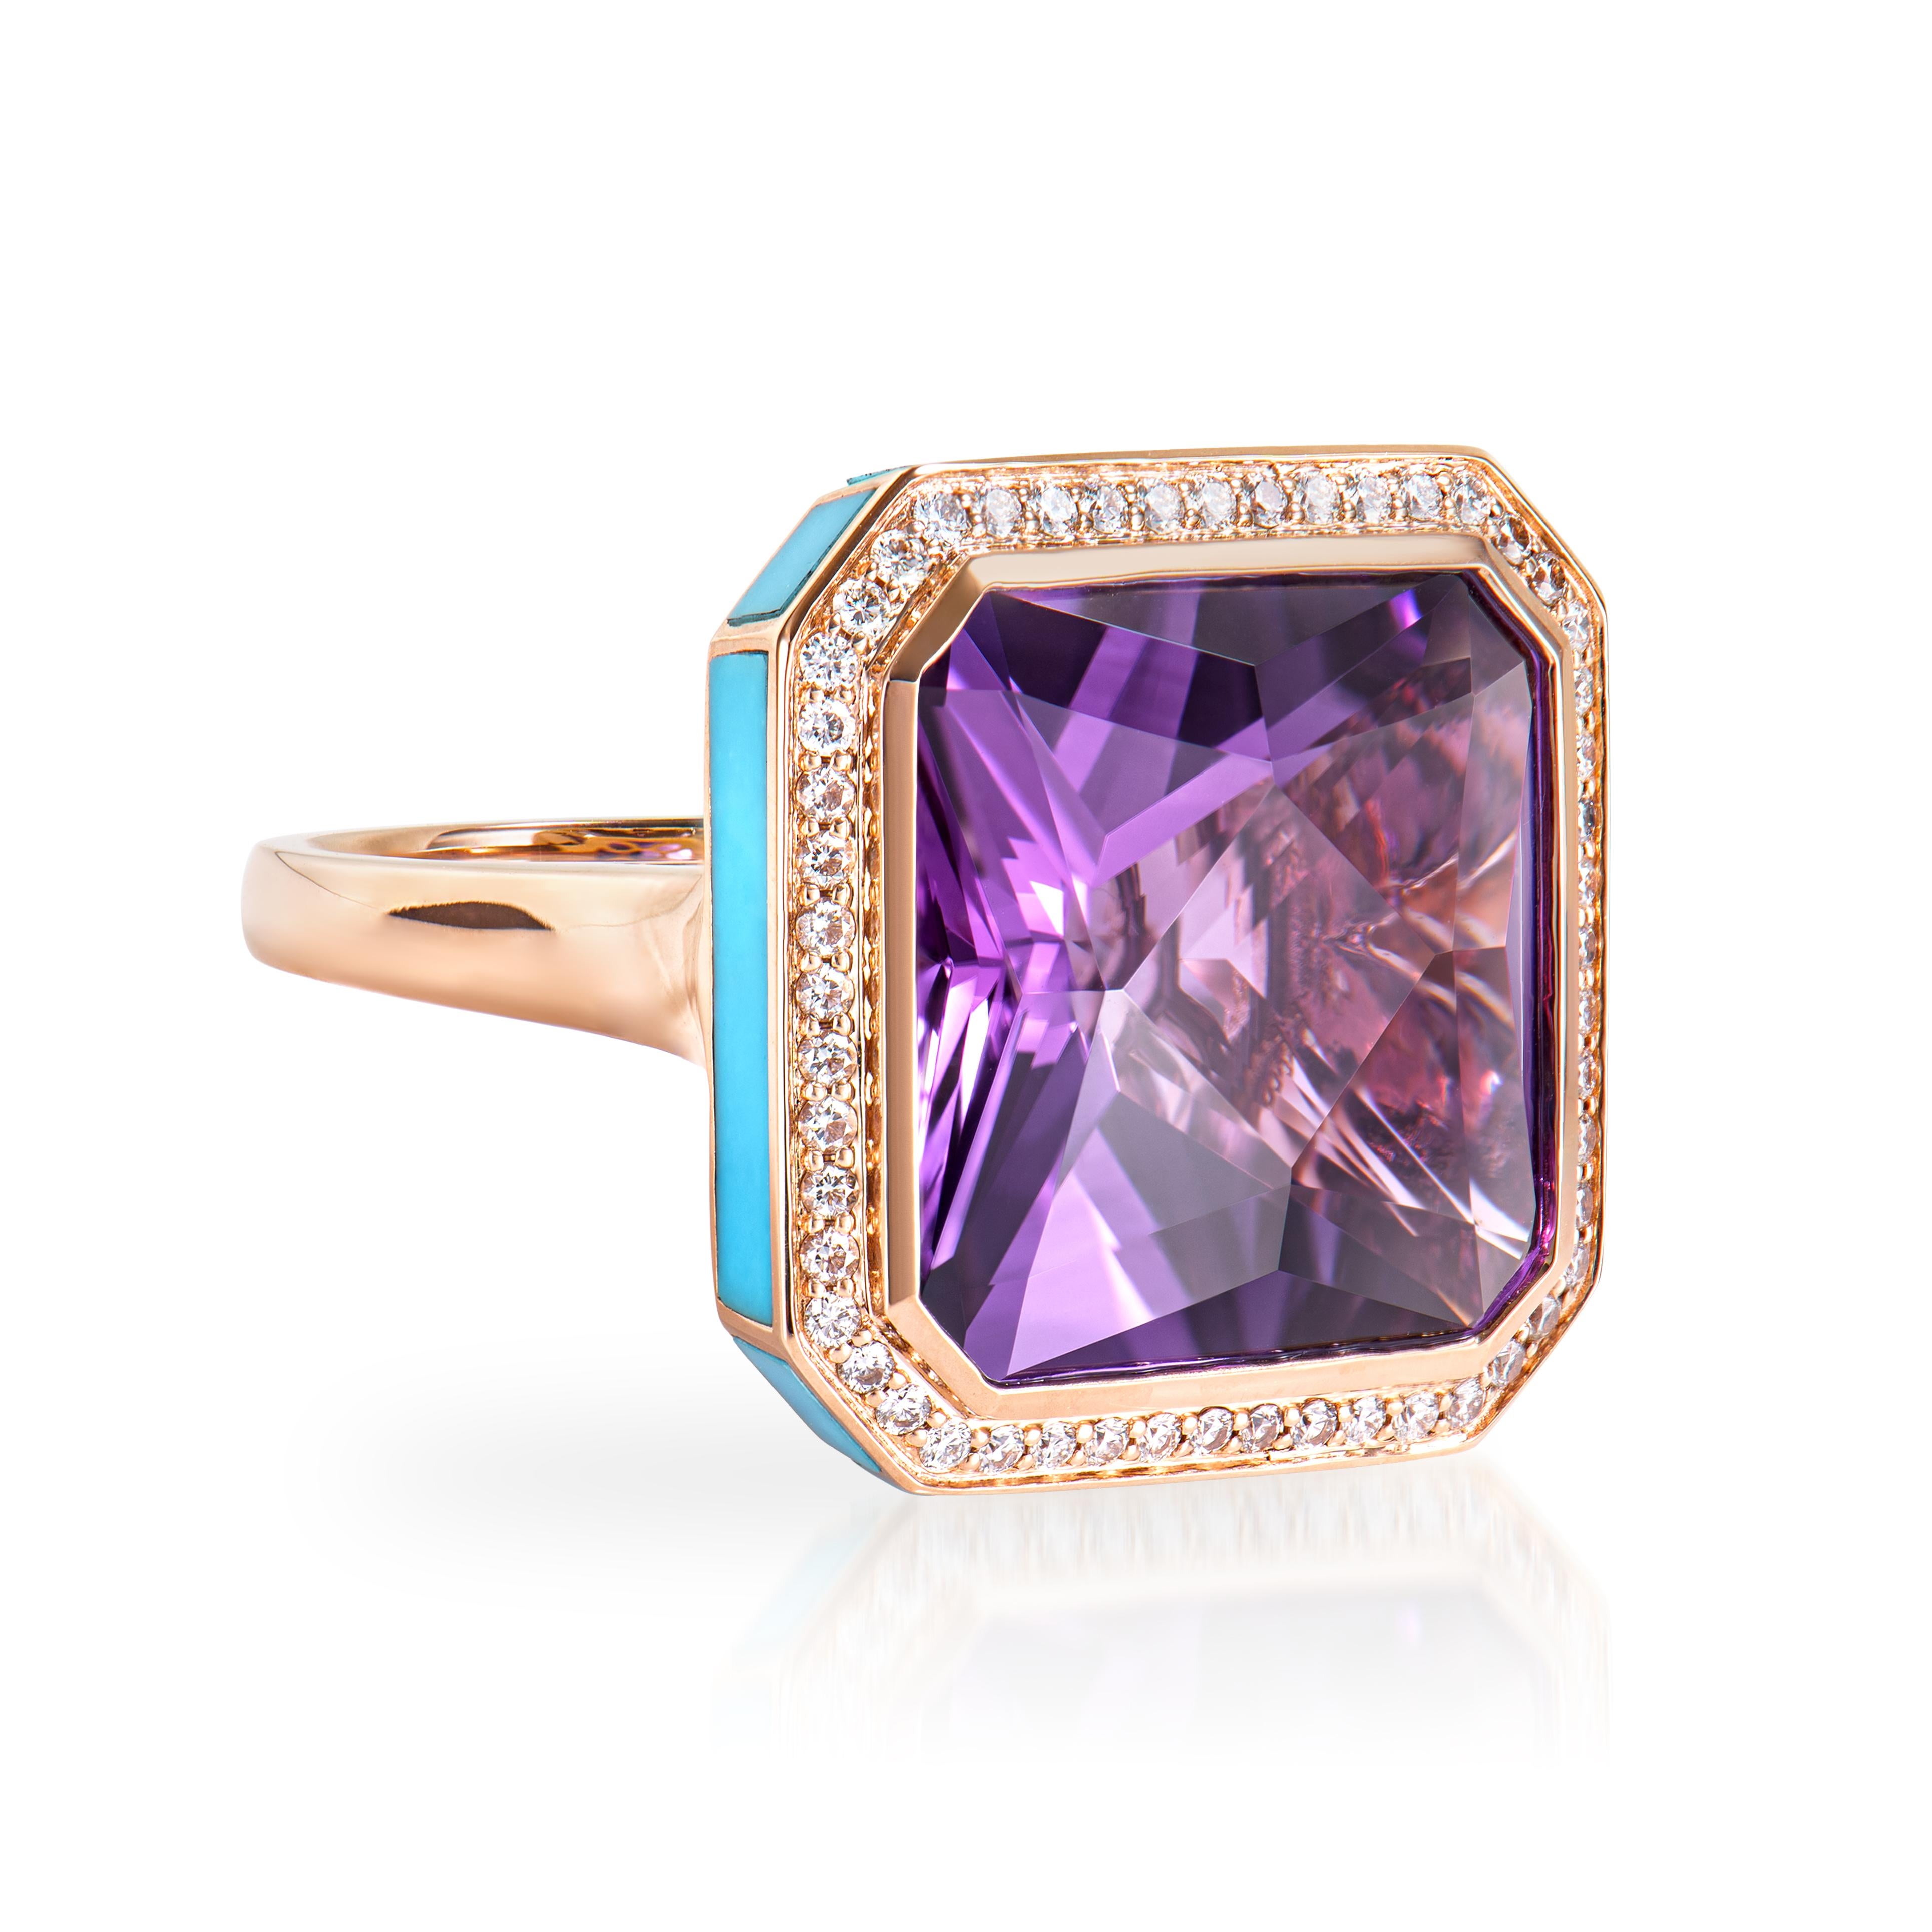 This lovely Amethyst ring is set in an octagon shape. The turquoise that embraces the ring's border adds to its beauty and elegance. This trendy ring is suitable for any event or gathering. These gemstones with diamonds are set in Rose gold for a